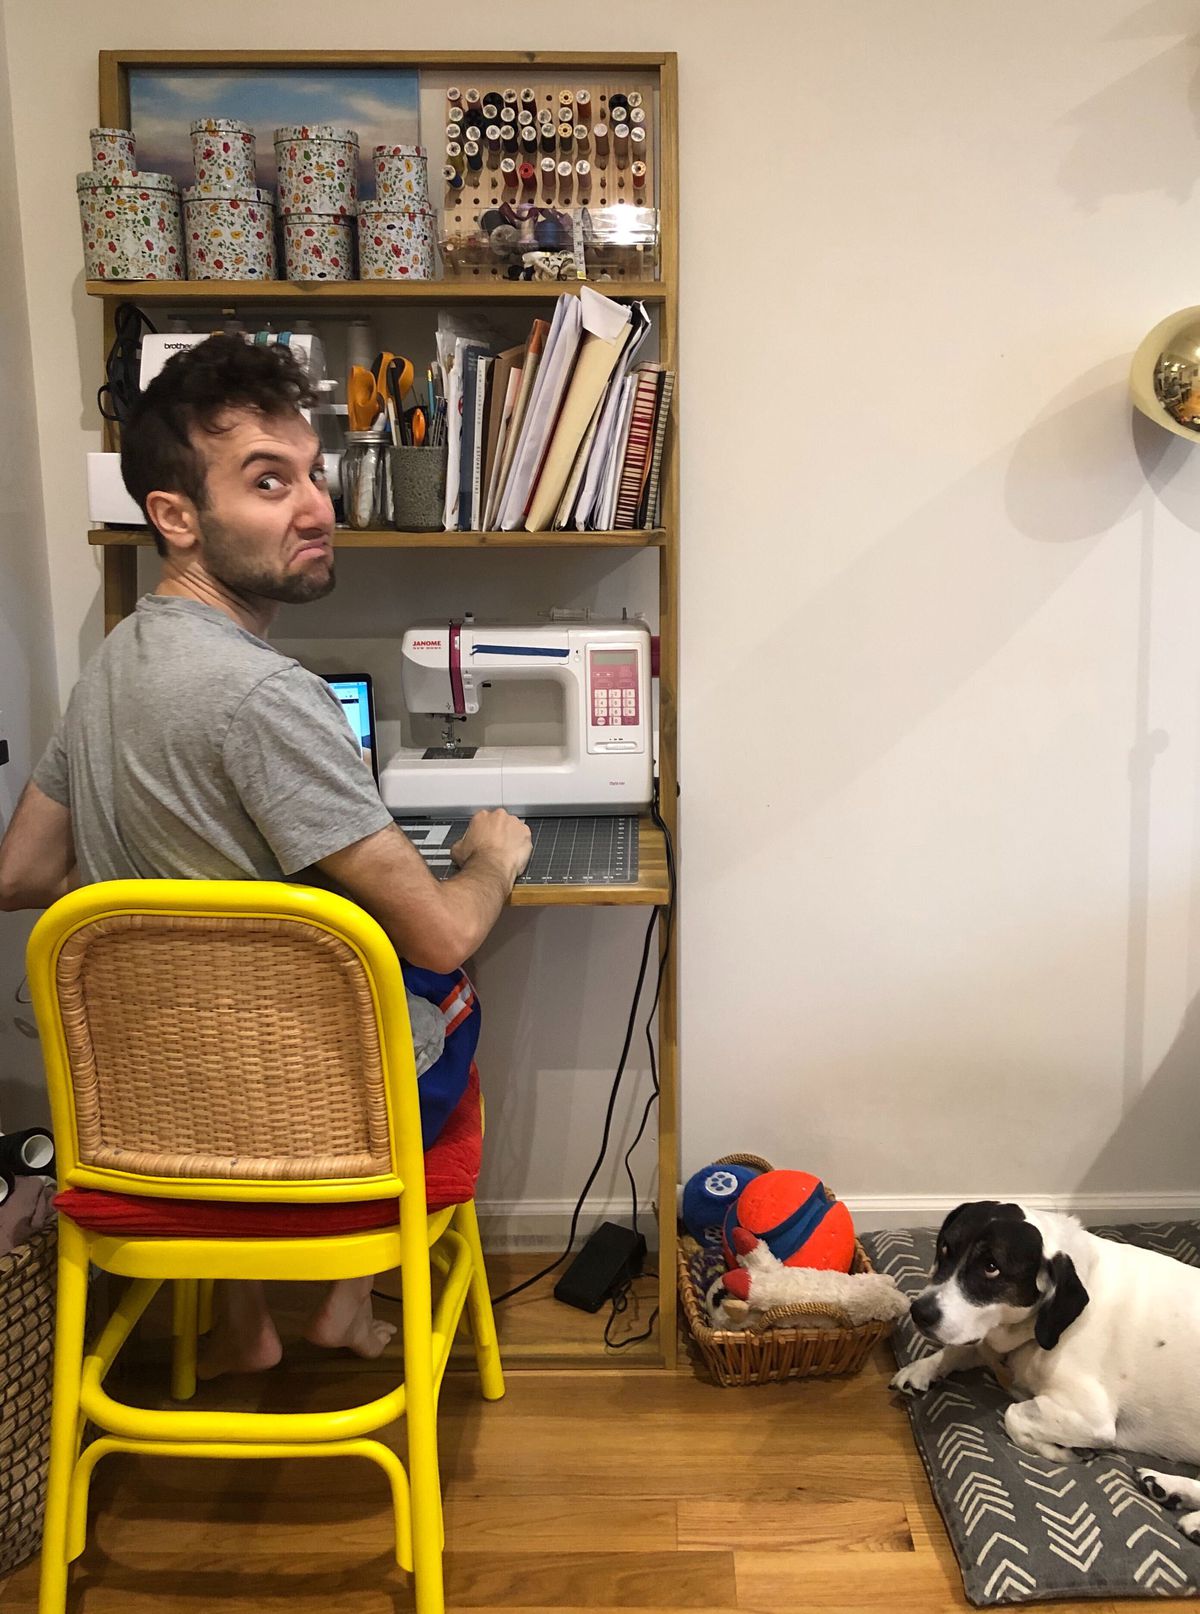 Seth working at his wife’s sewing desk while dog Trudy looks on